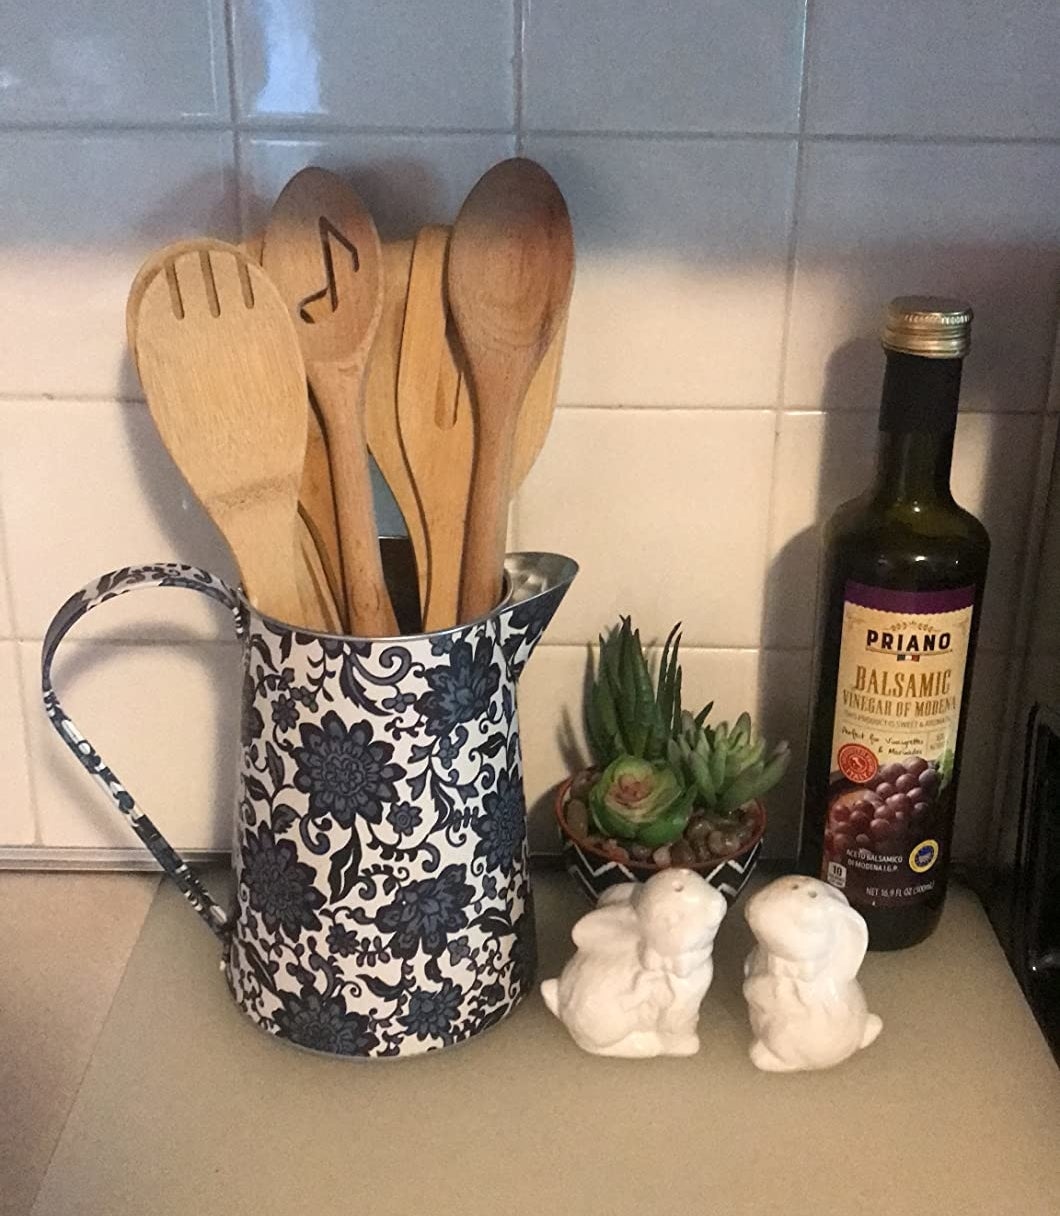 A pitcher with floral patterns holding wooden utensils next to a bottle of balsamic vinegar and decorative items on a kitchen counter